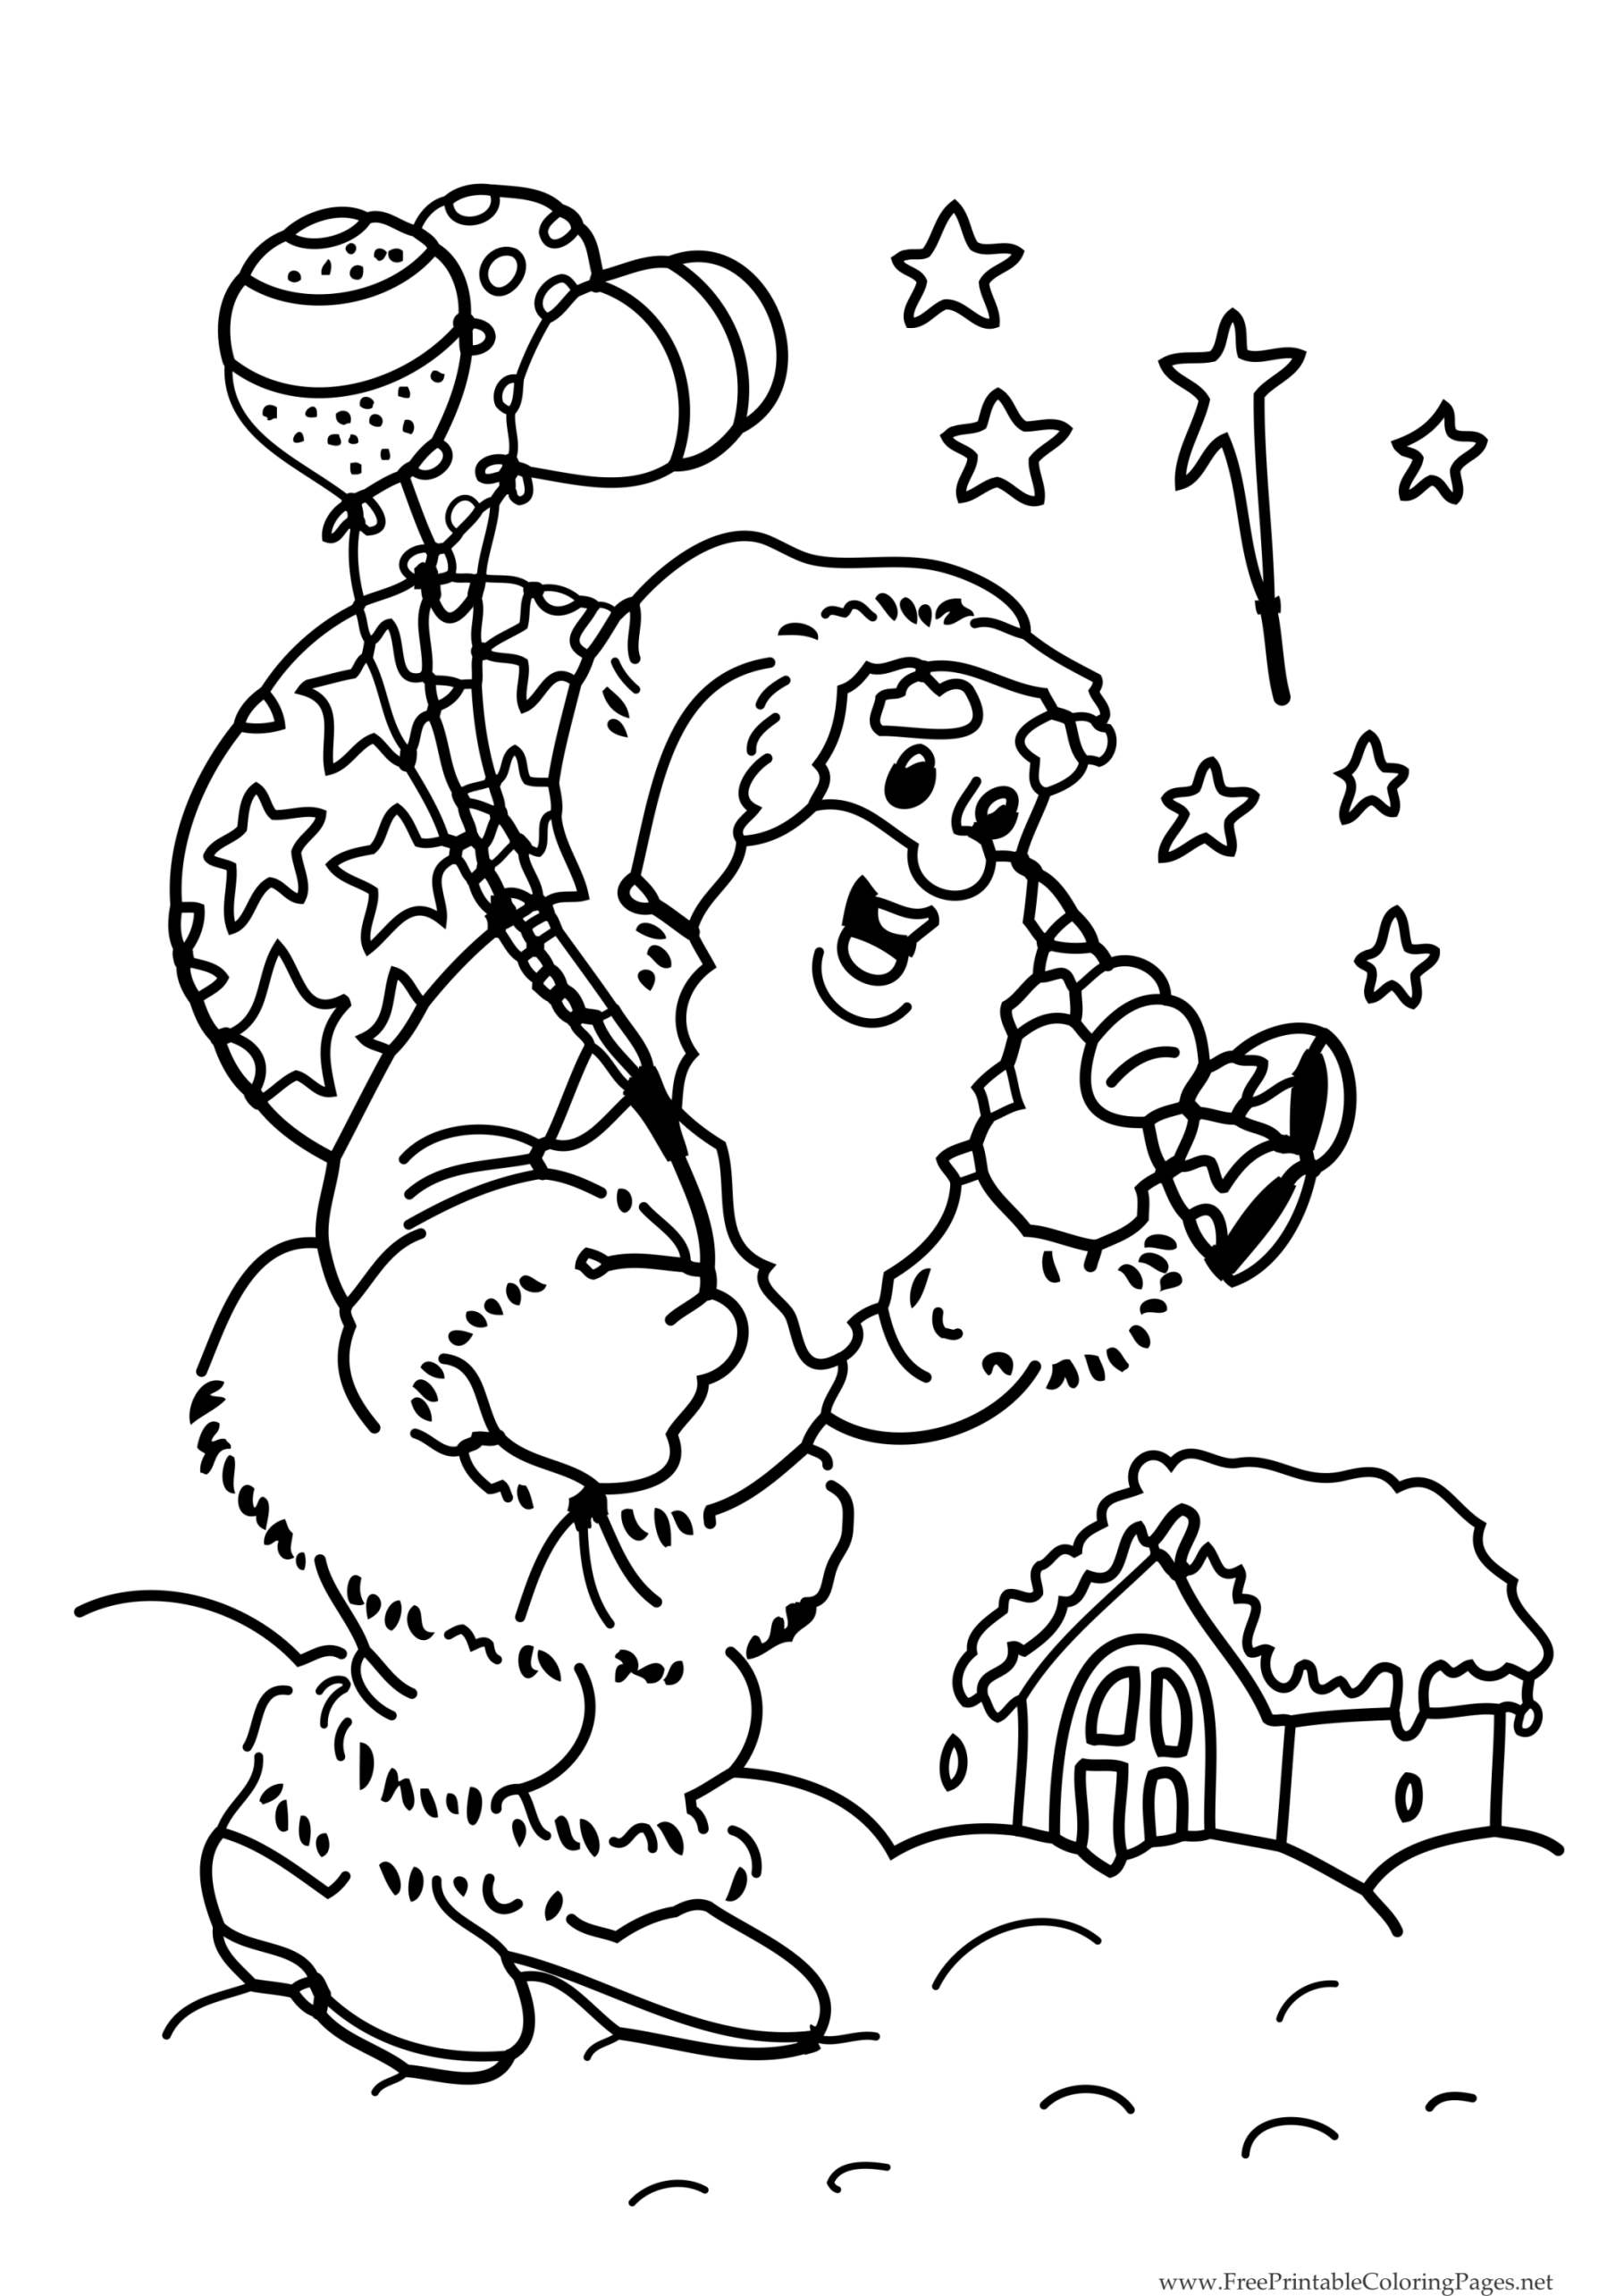 100 Best Christmas 28+ Santa Claus To Color Printable - Free Printable PDFs